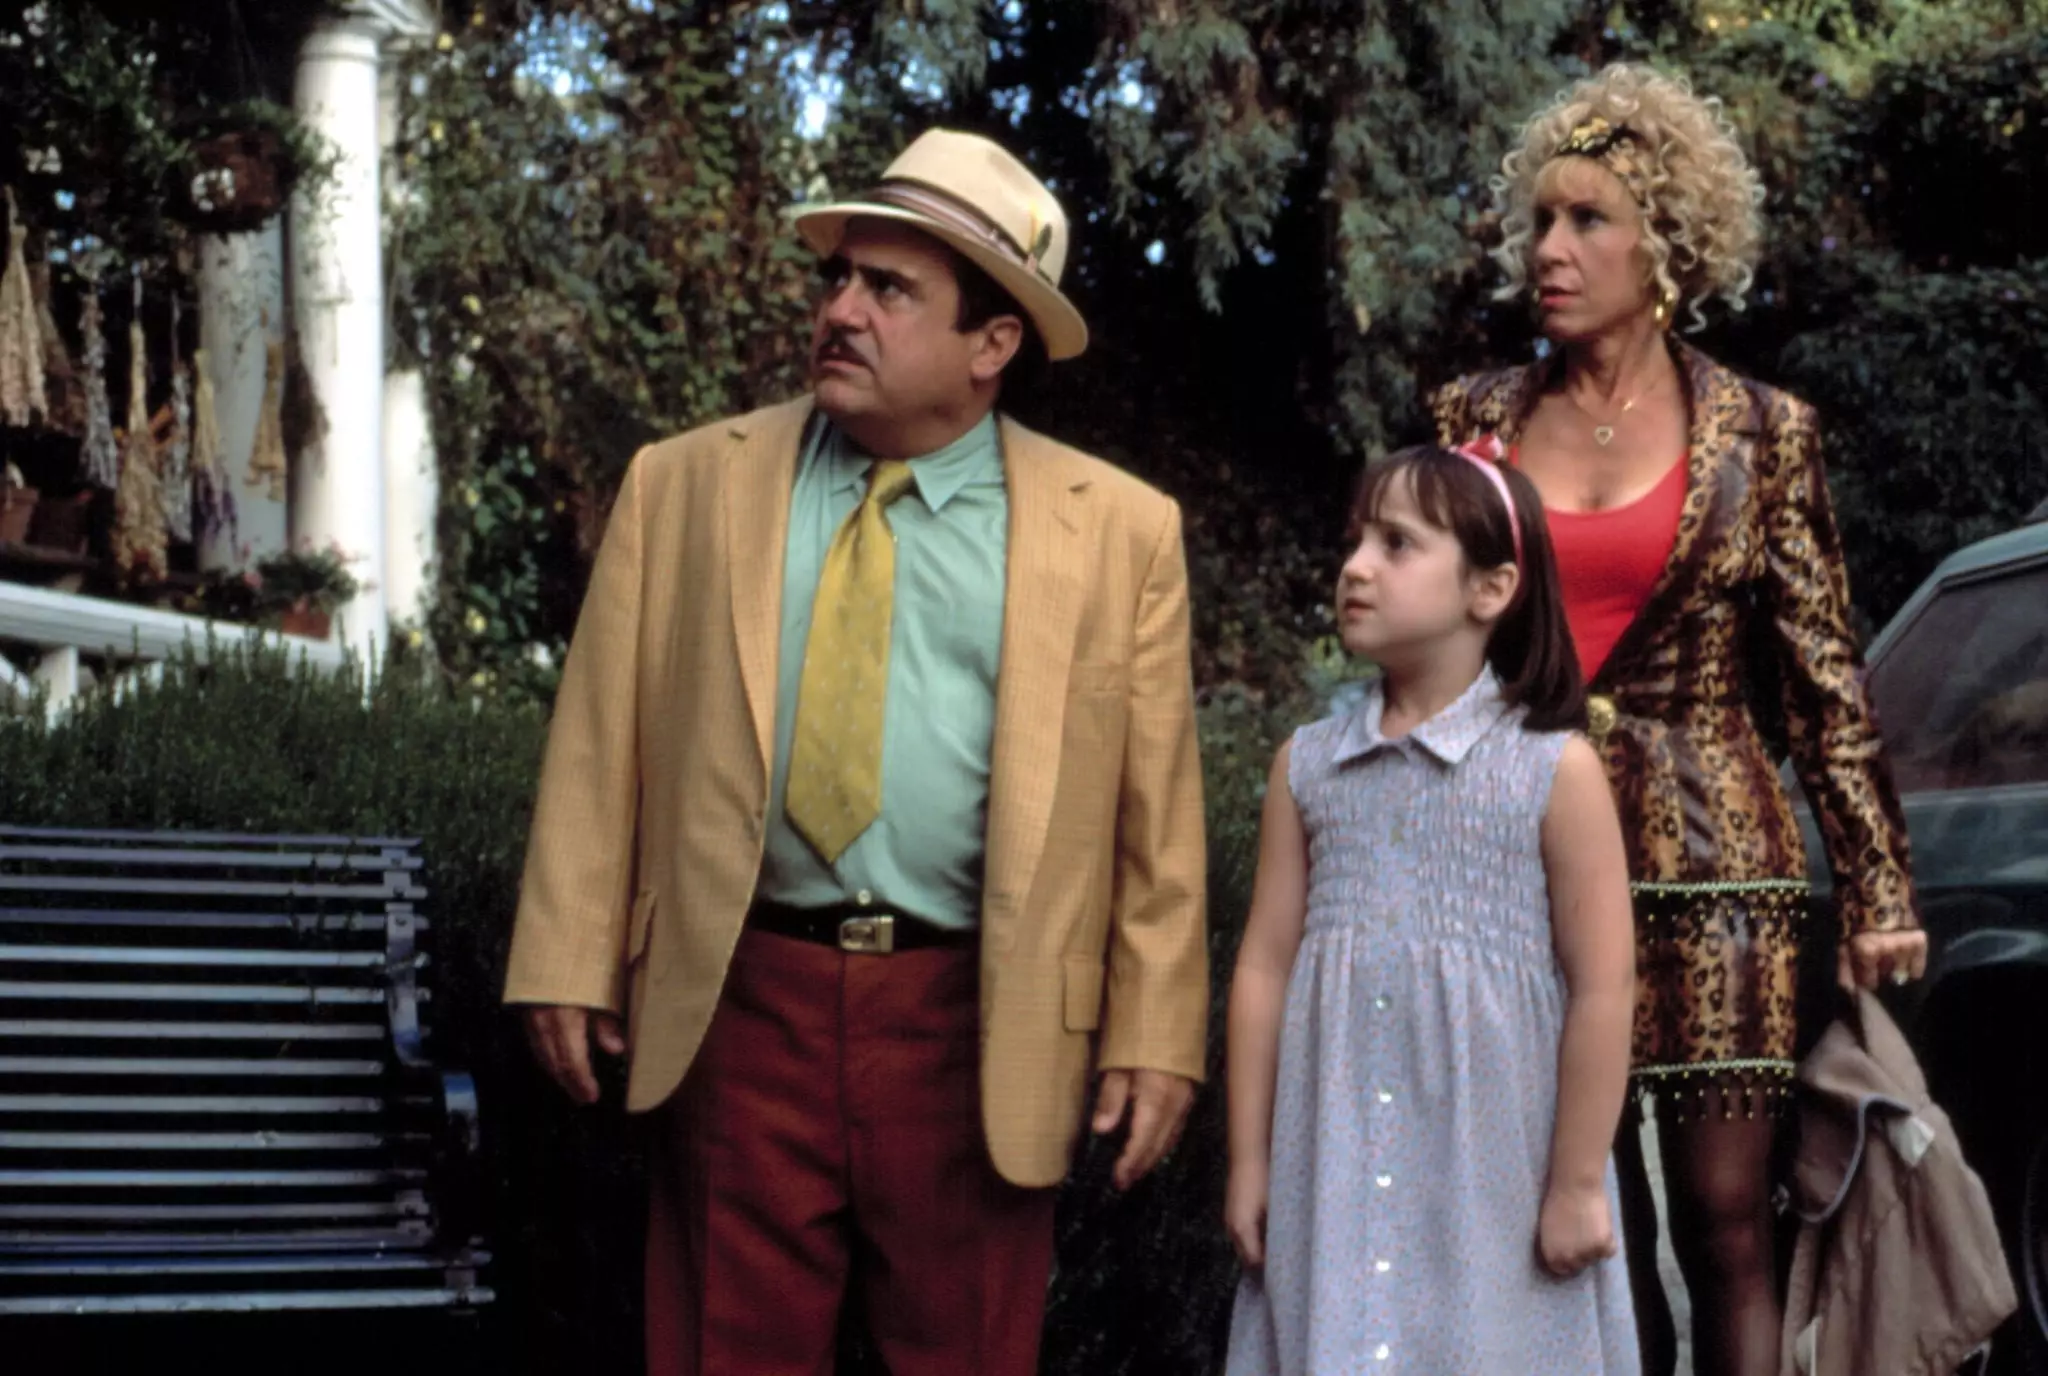 Mara spent a lot of time with her co-stars Danny DeVito and Rhea Perlman (